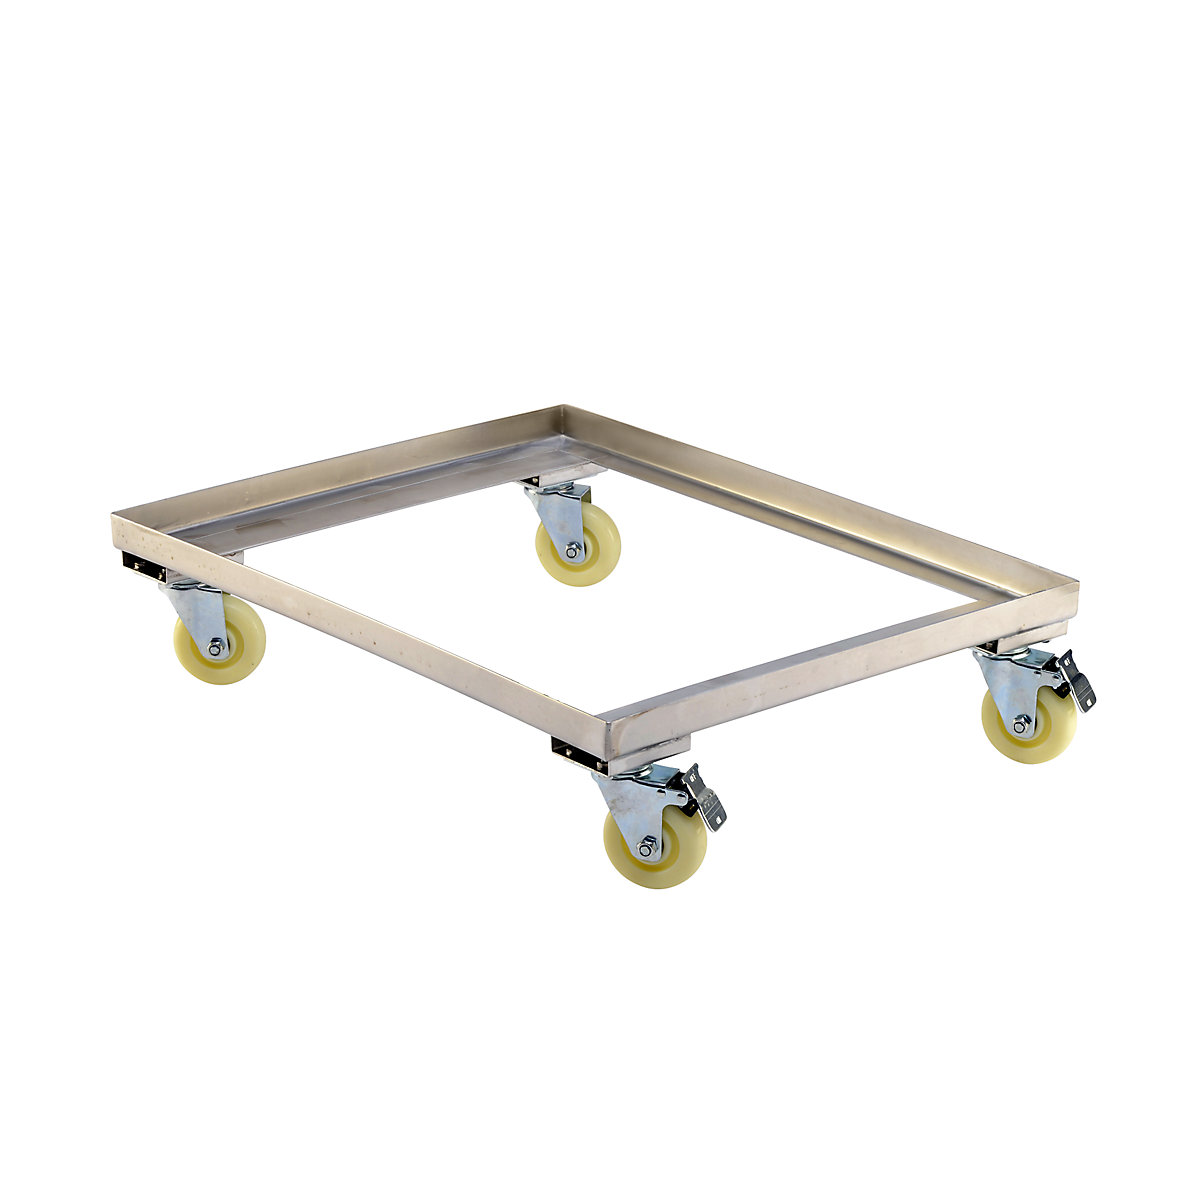 Stainless steel dolly, max. load 150 kg, LxW 810 x 610 mm, 5+ items-6